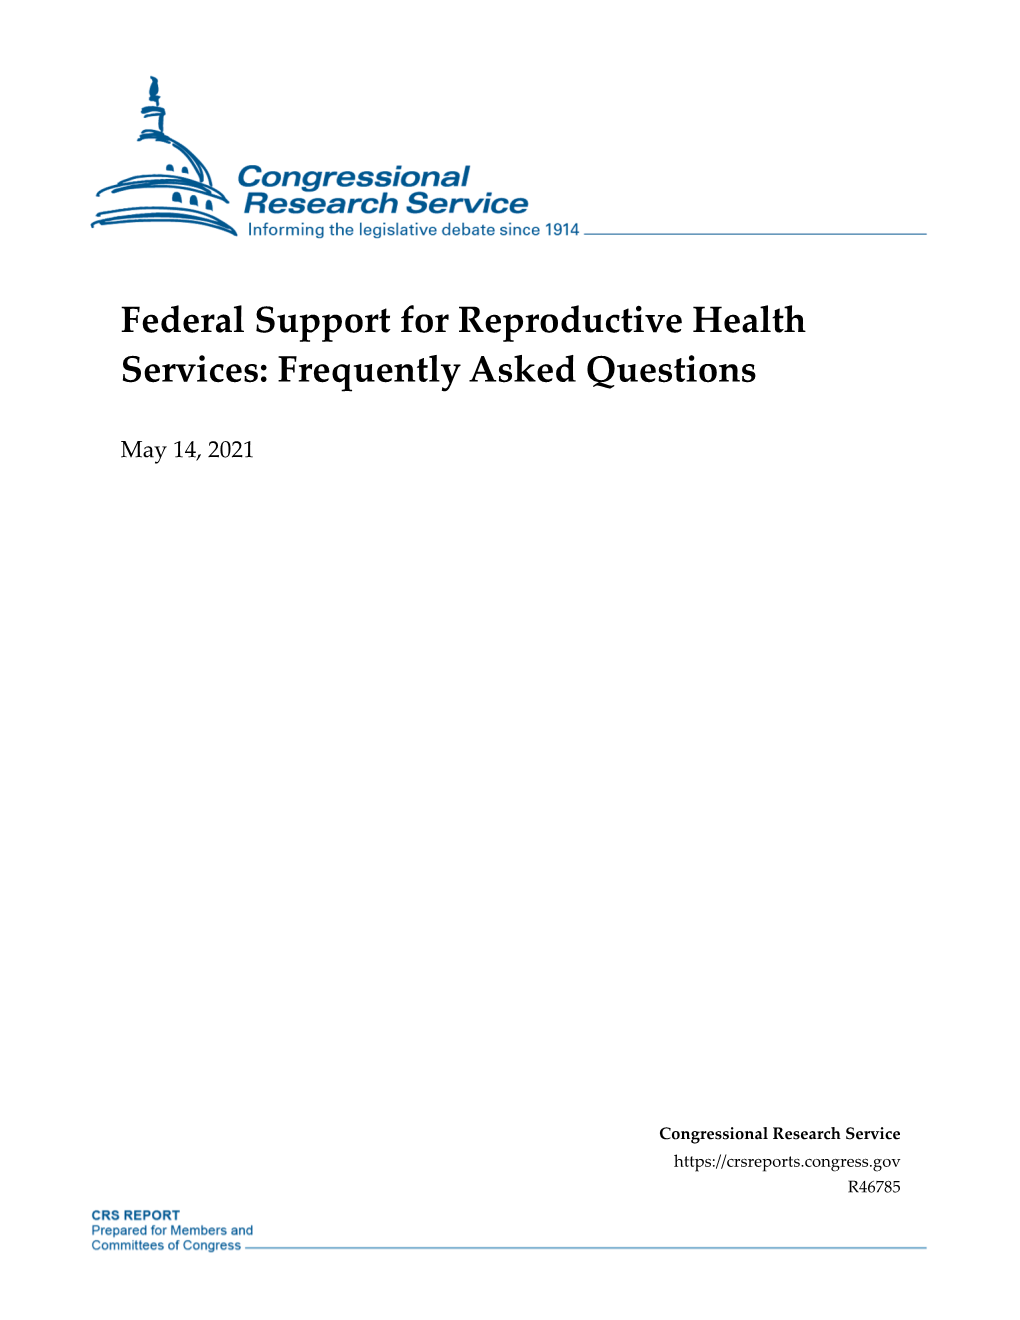 Federal Support for Reproductive Health Services: Frequently Asked Questions